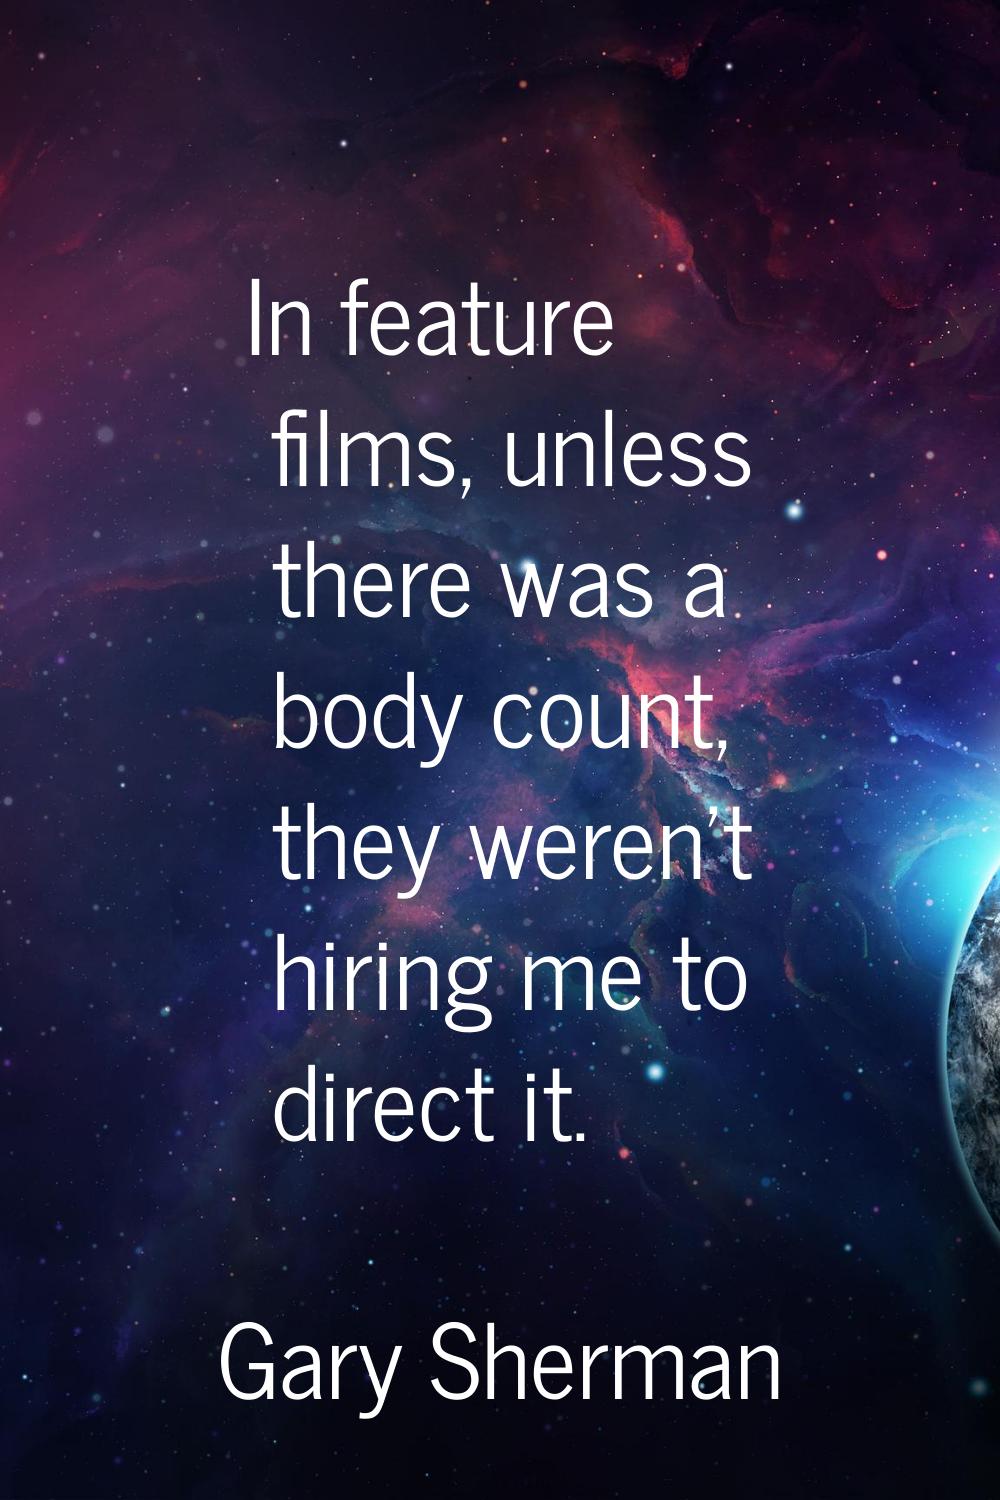 In feature films, unless there was a body count, they weren't hiring me to direct it.